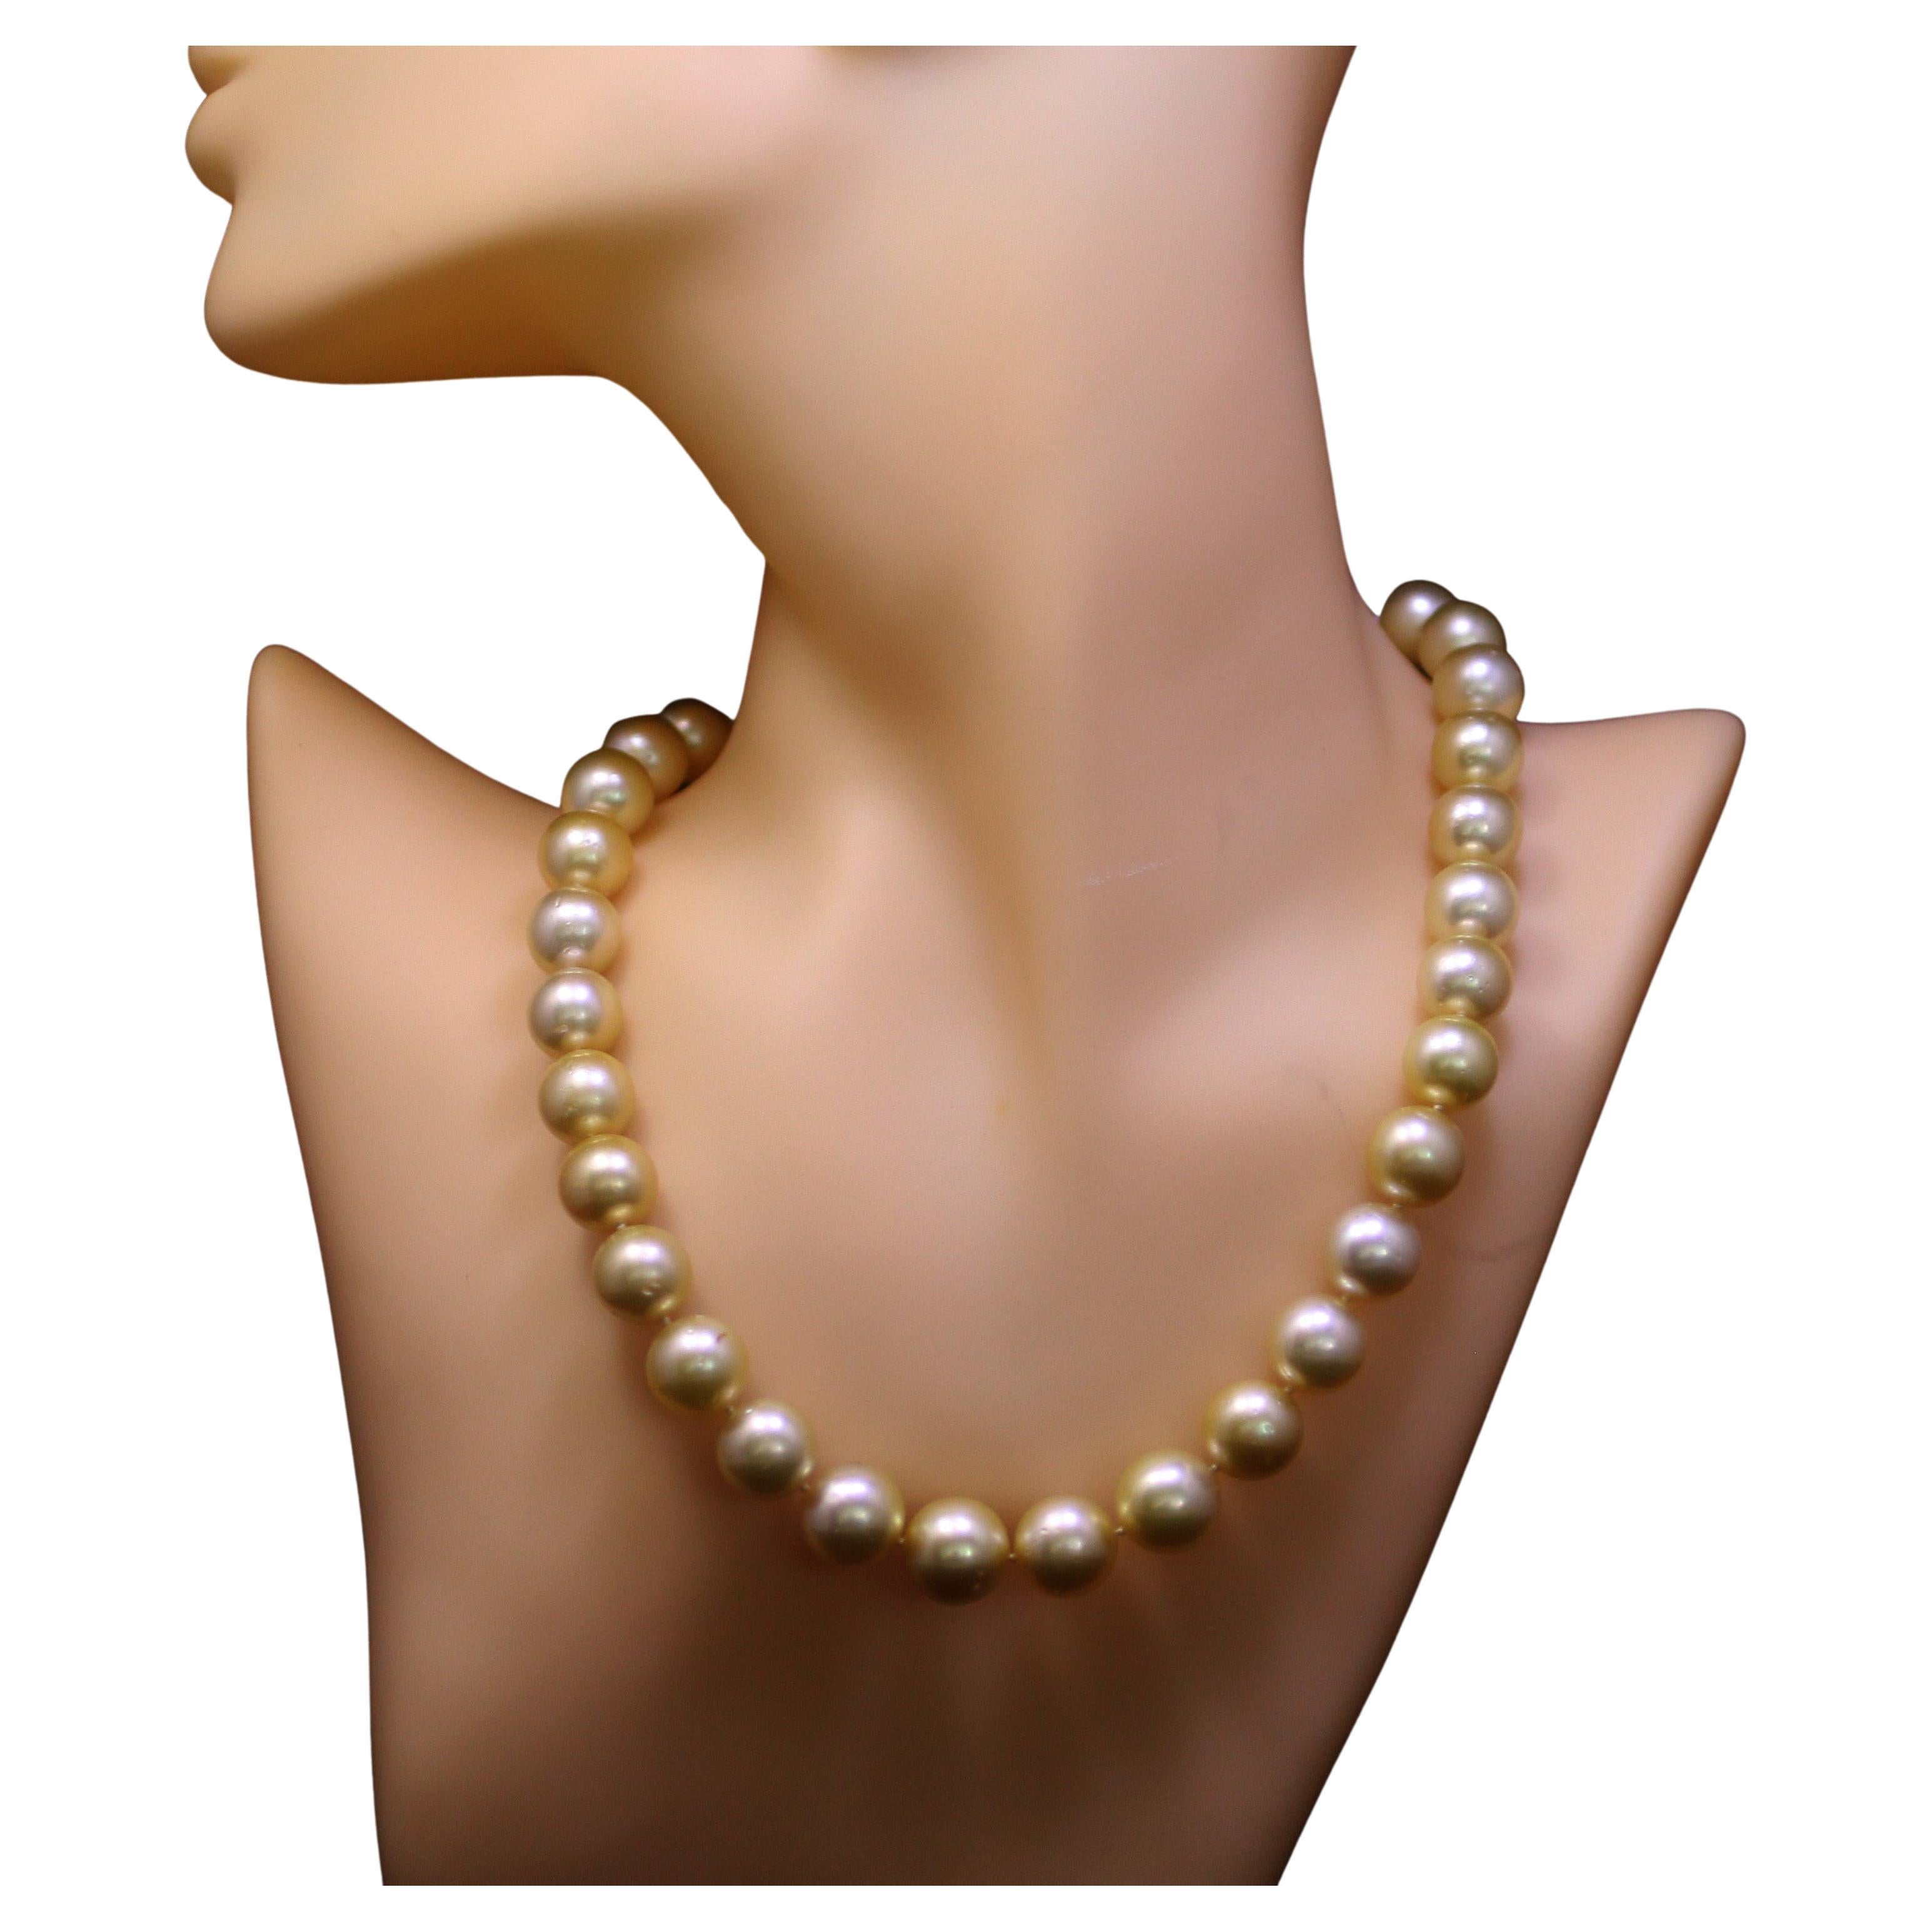 Hakimoto By Jewel Of Ocean 18K South Sea Strand Necklace
18K Yellow Gold  
Weight (g): 75.3
Cultured Natural Color Golden South Sea Pearl 
Pearl Size: 11X12.6mm 
Pearl Shape: Round 
Body color: Natural Color Golden
Orient: Very Good
Luster: Very